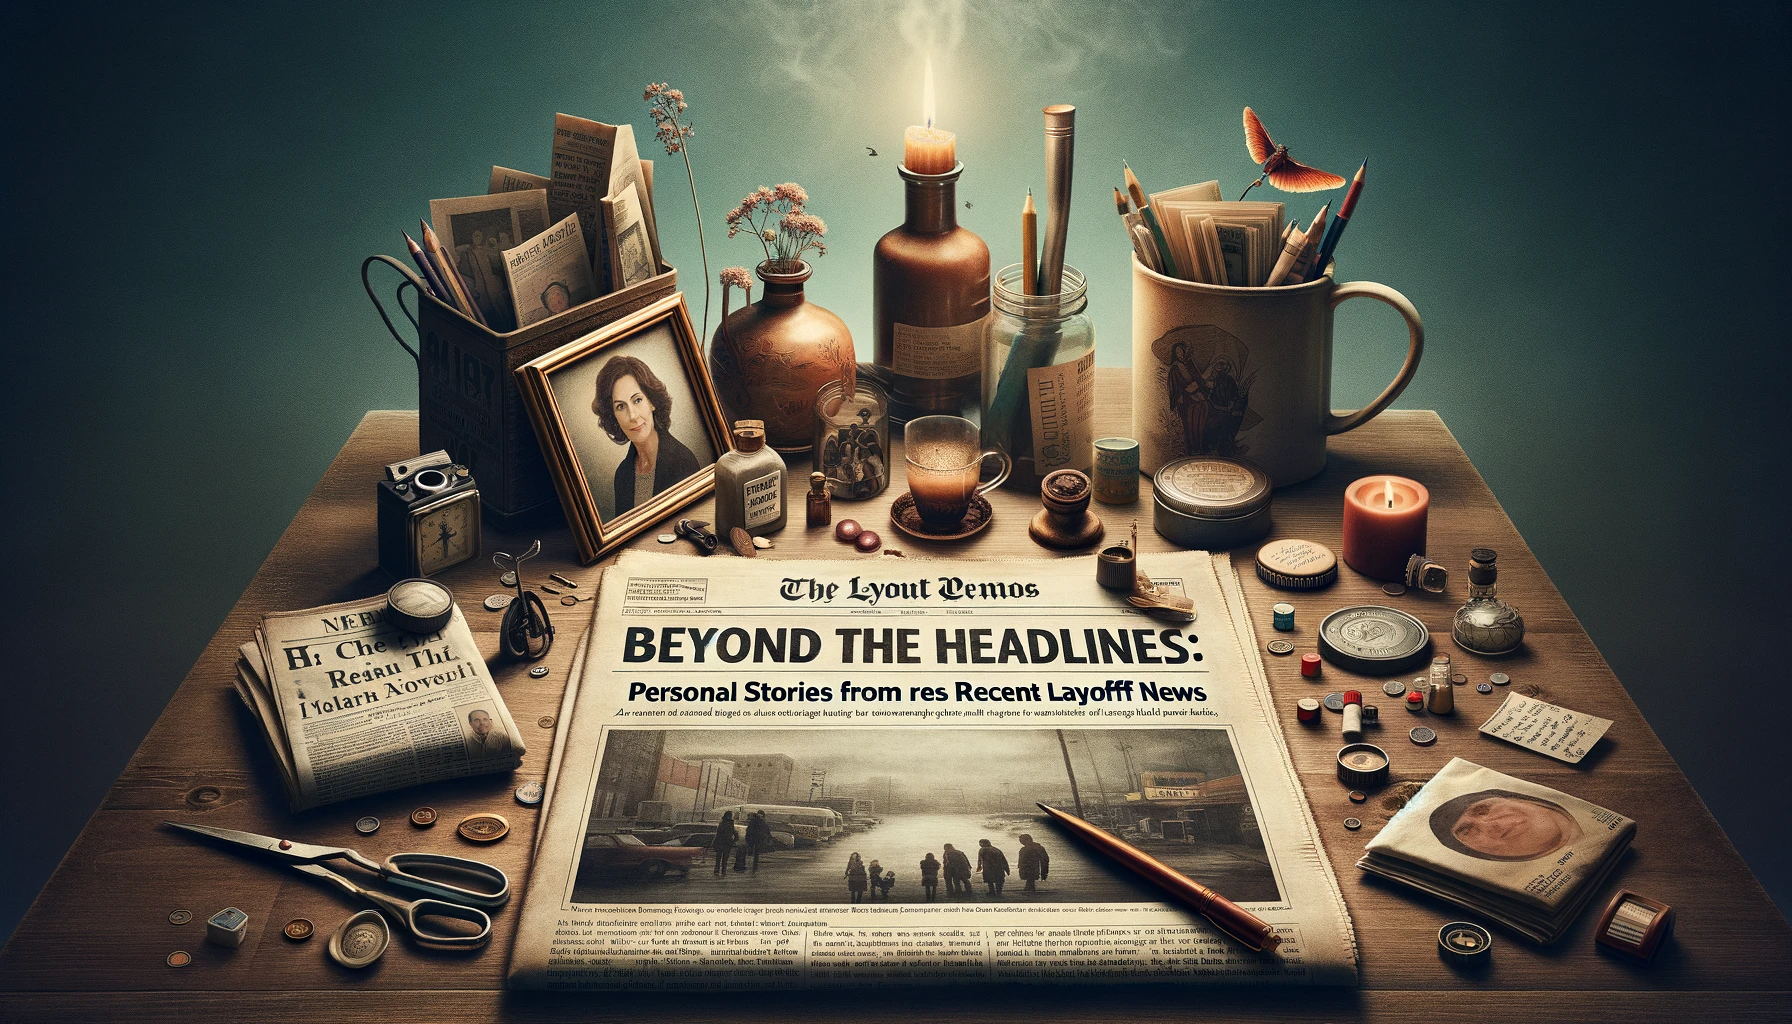 Beyond the Headlines: Personal Stories from Recent Layoff News